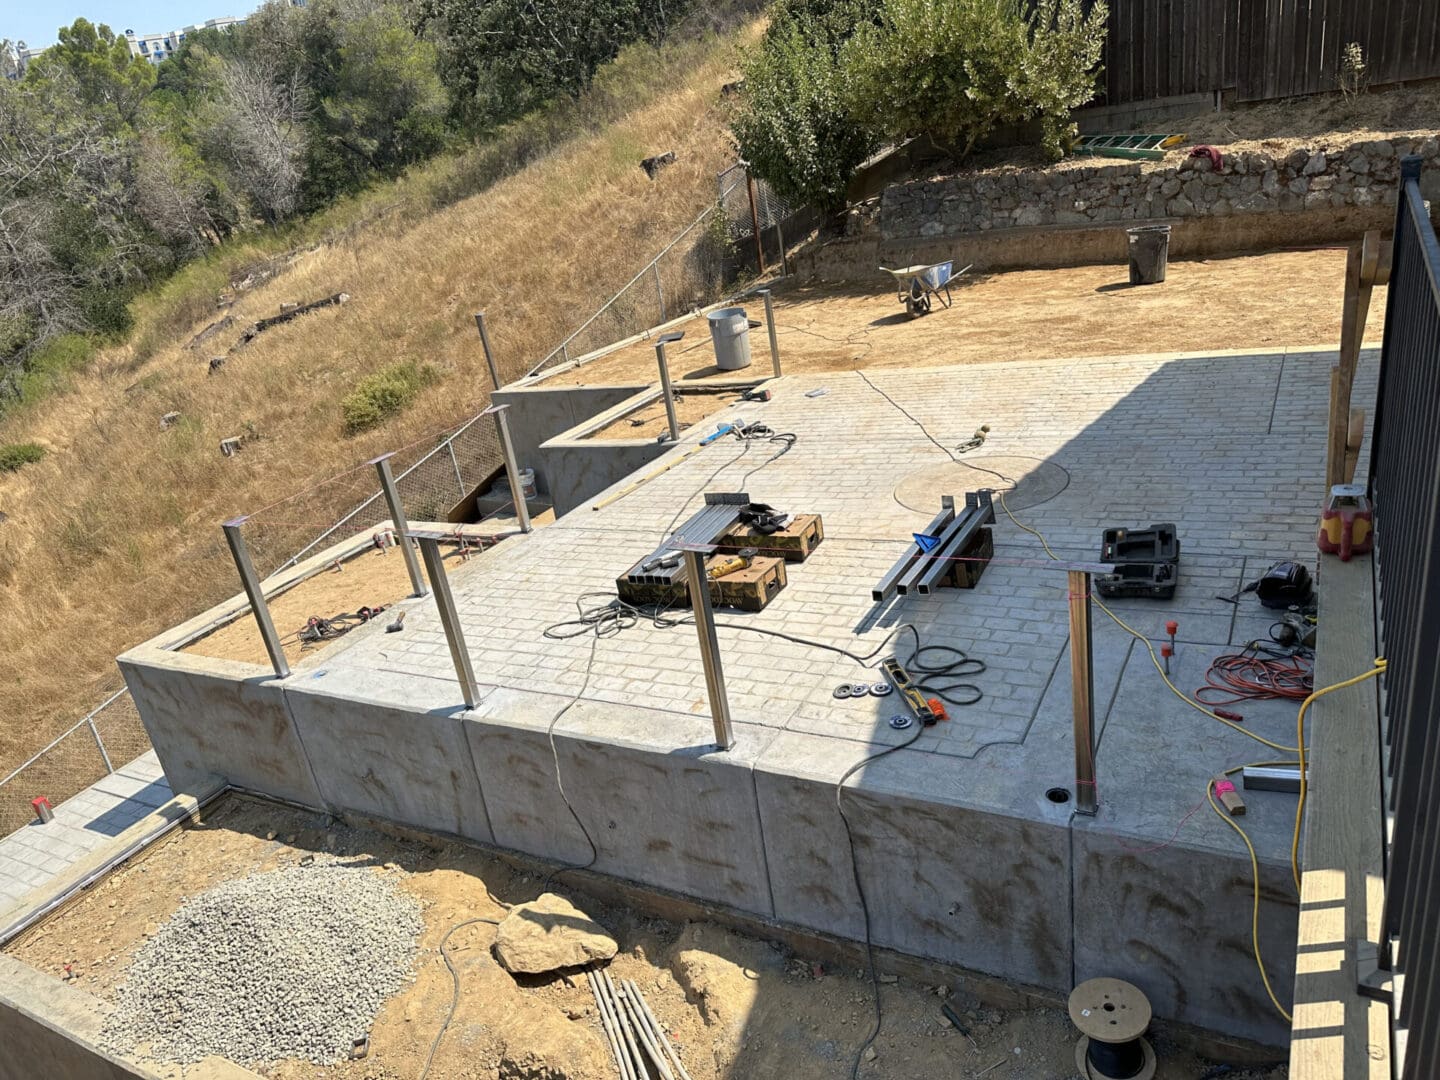 A concrete slab being built on top of the hillside.